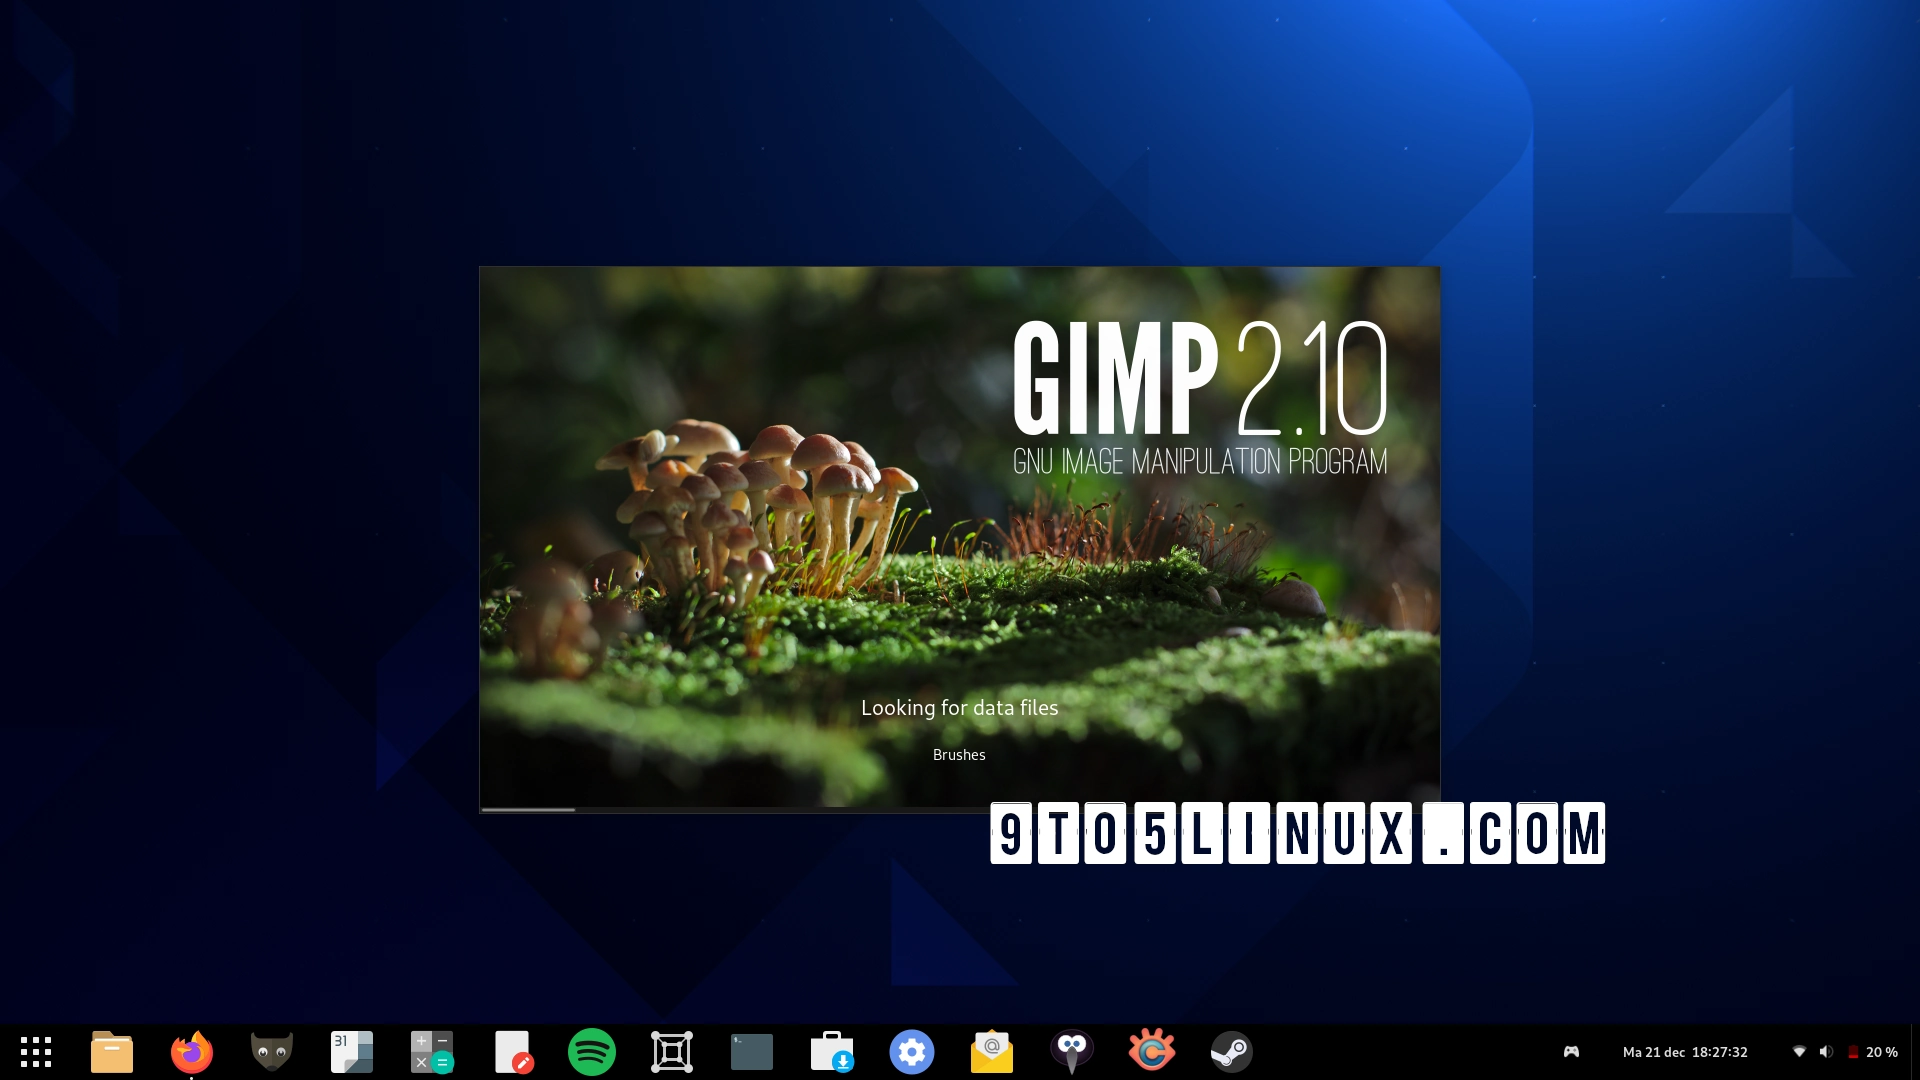 GIMP 2.10.32 Released with Support for 8/16-bit CMYK(A) TIFF Files, BigTIFF